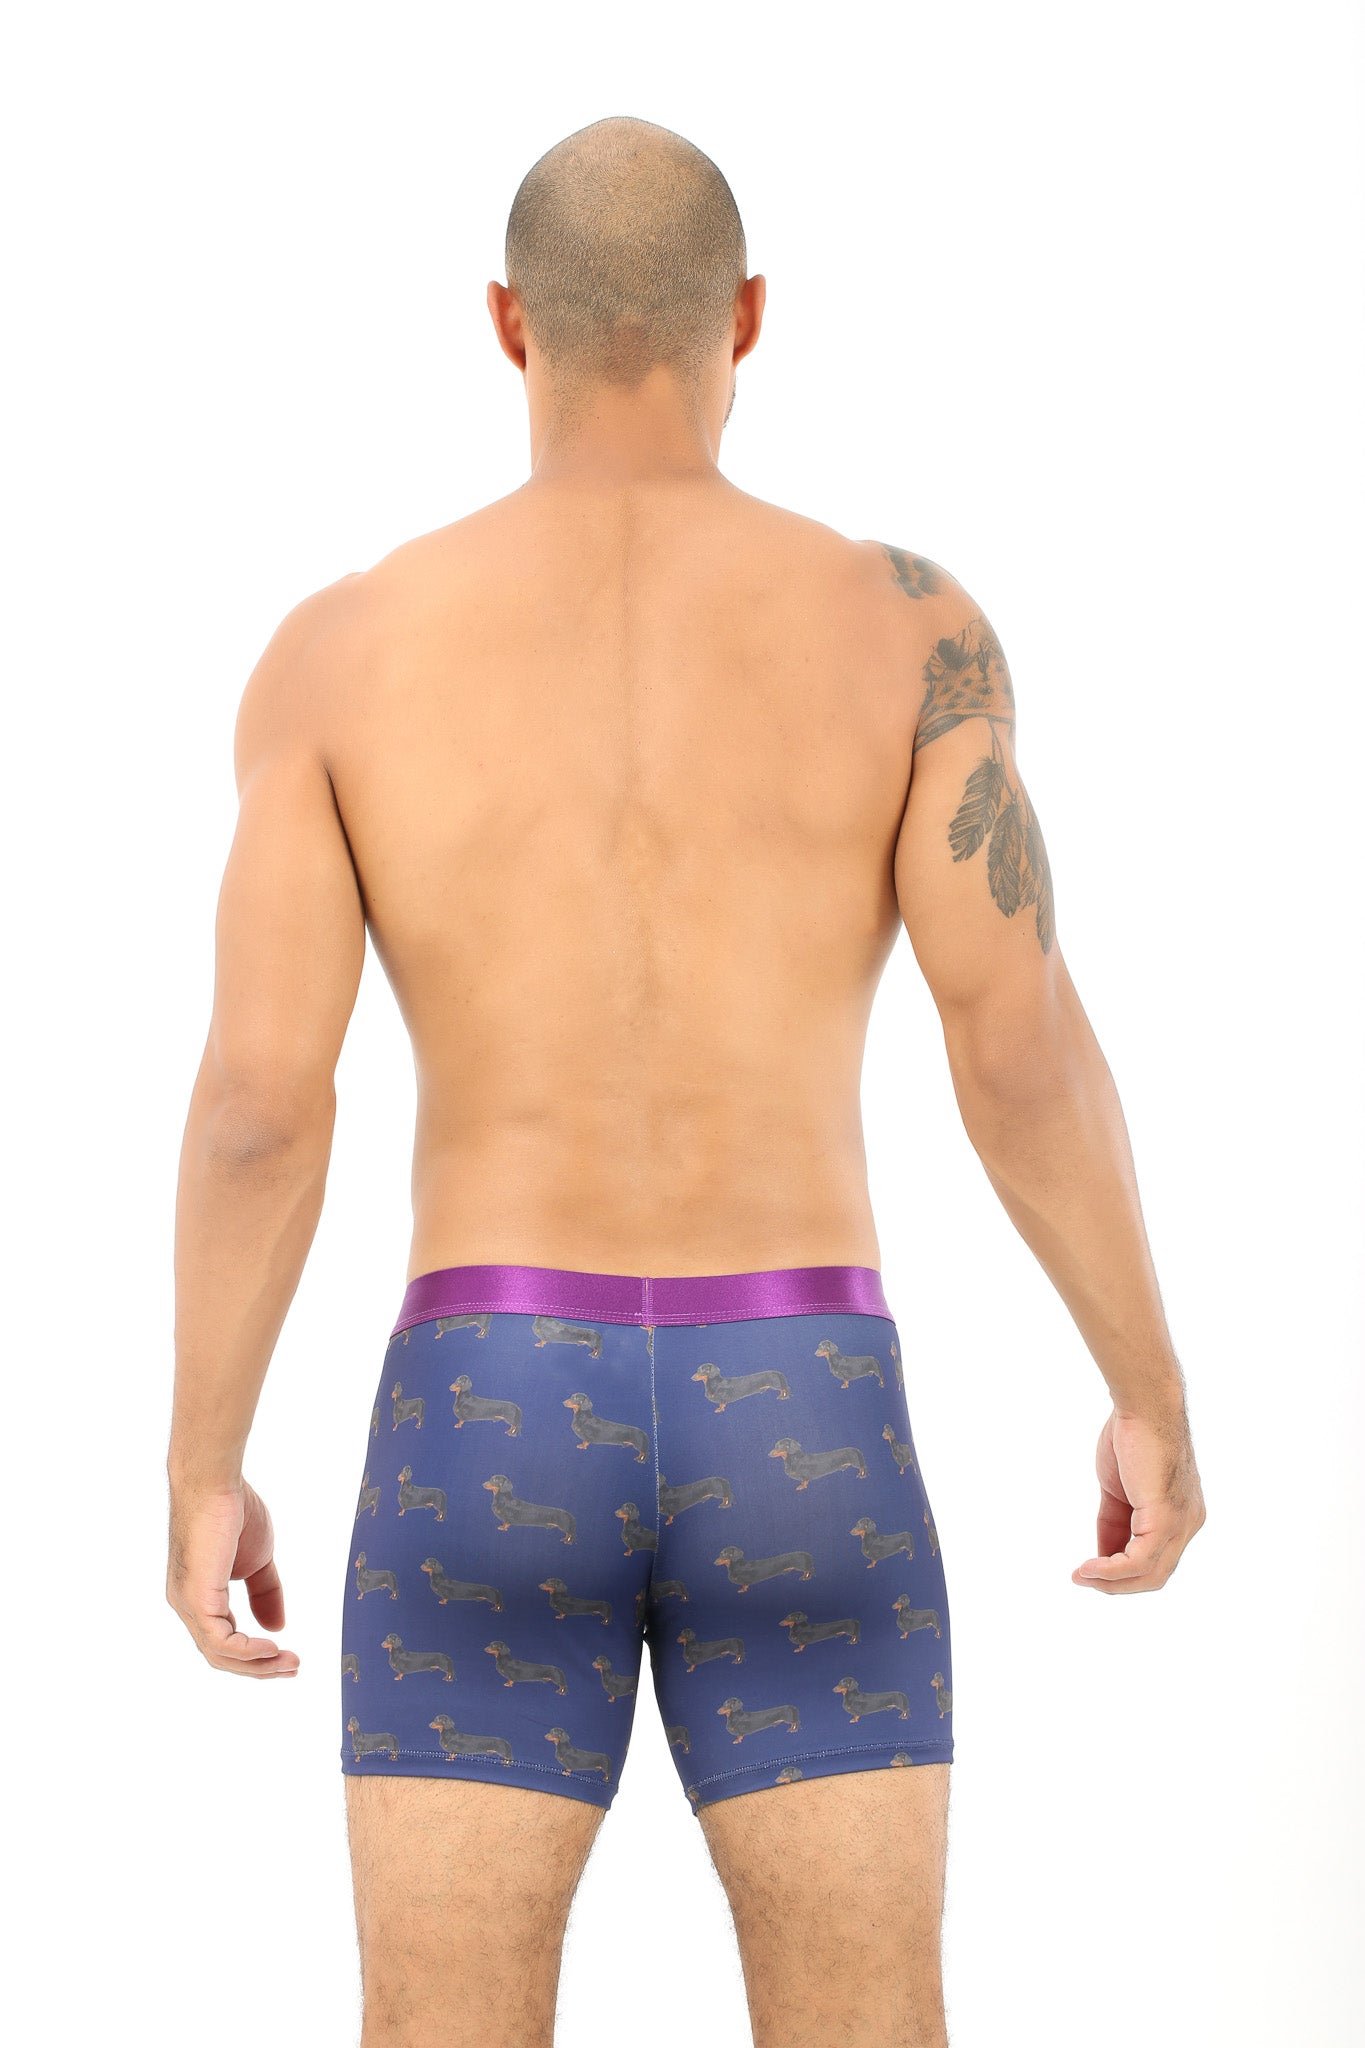 The back view of a man wearing comfortable and stylish Sausage Dog Underwear.